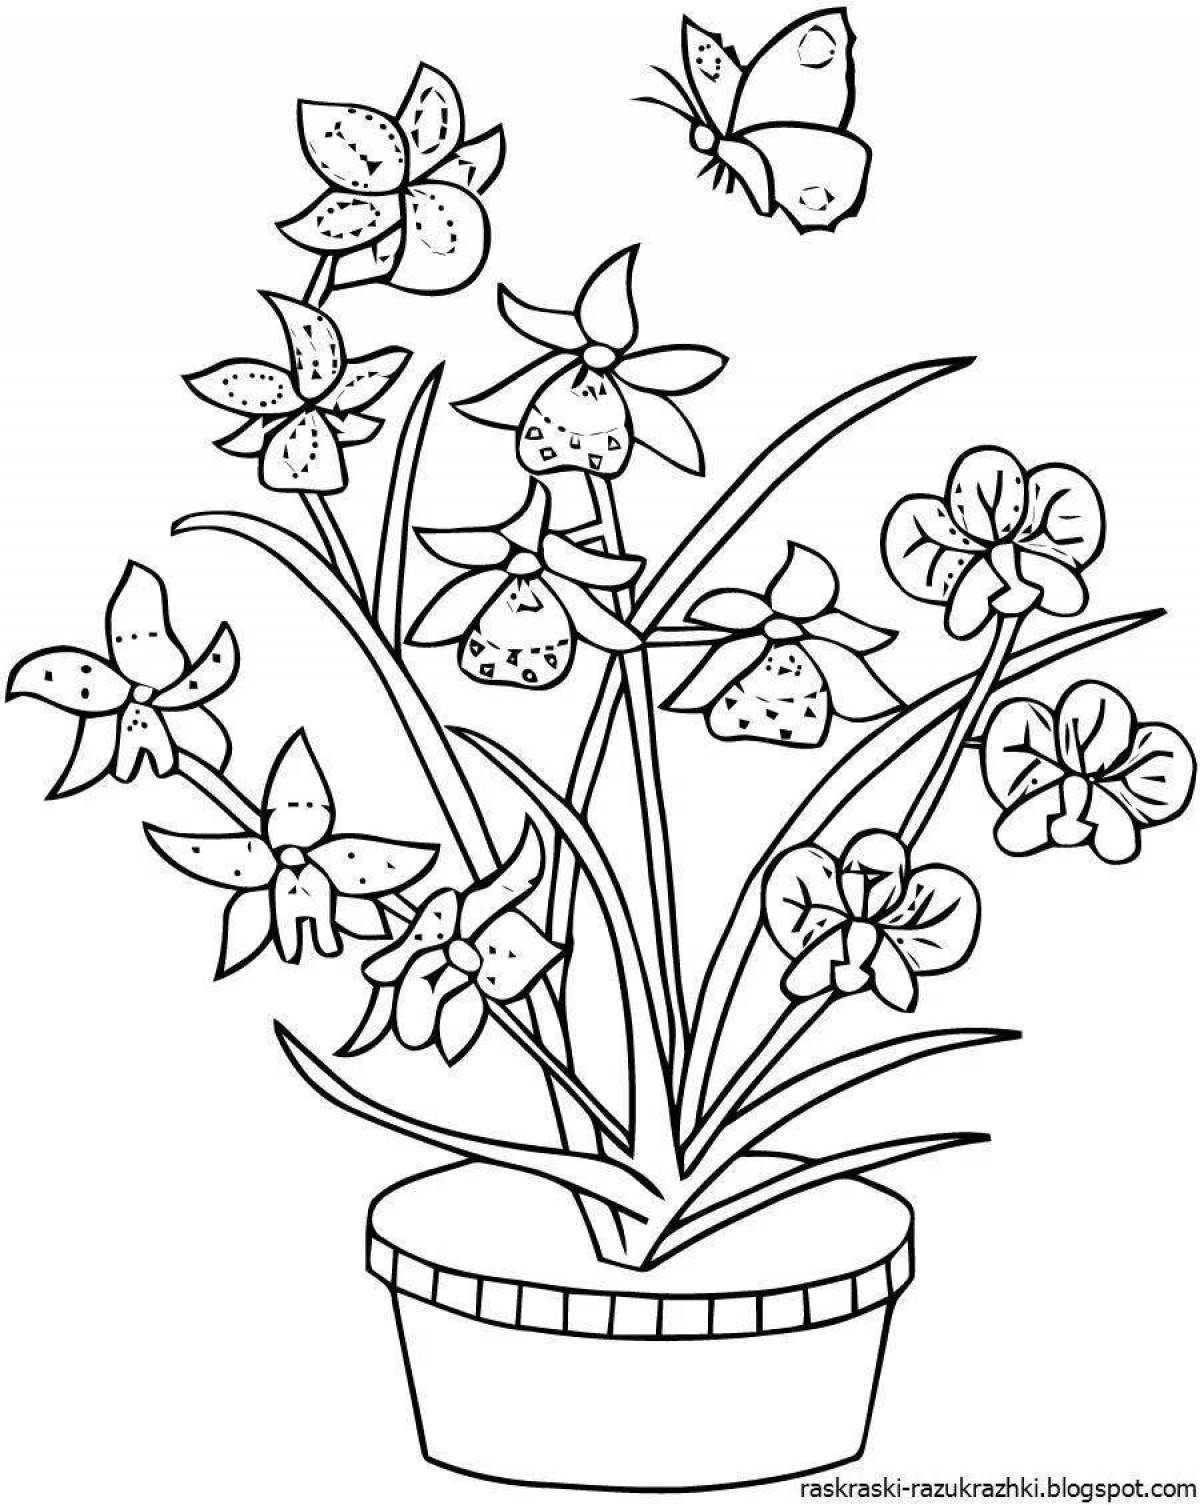 Fun indoor flower coloring for minors